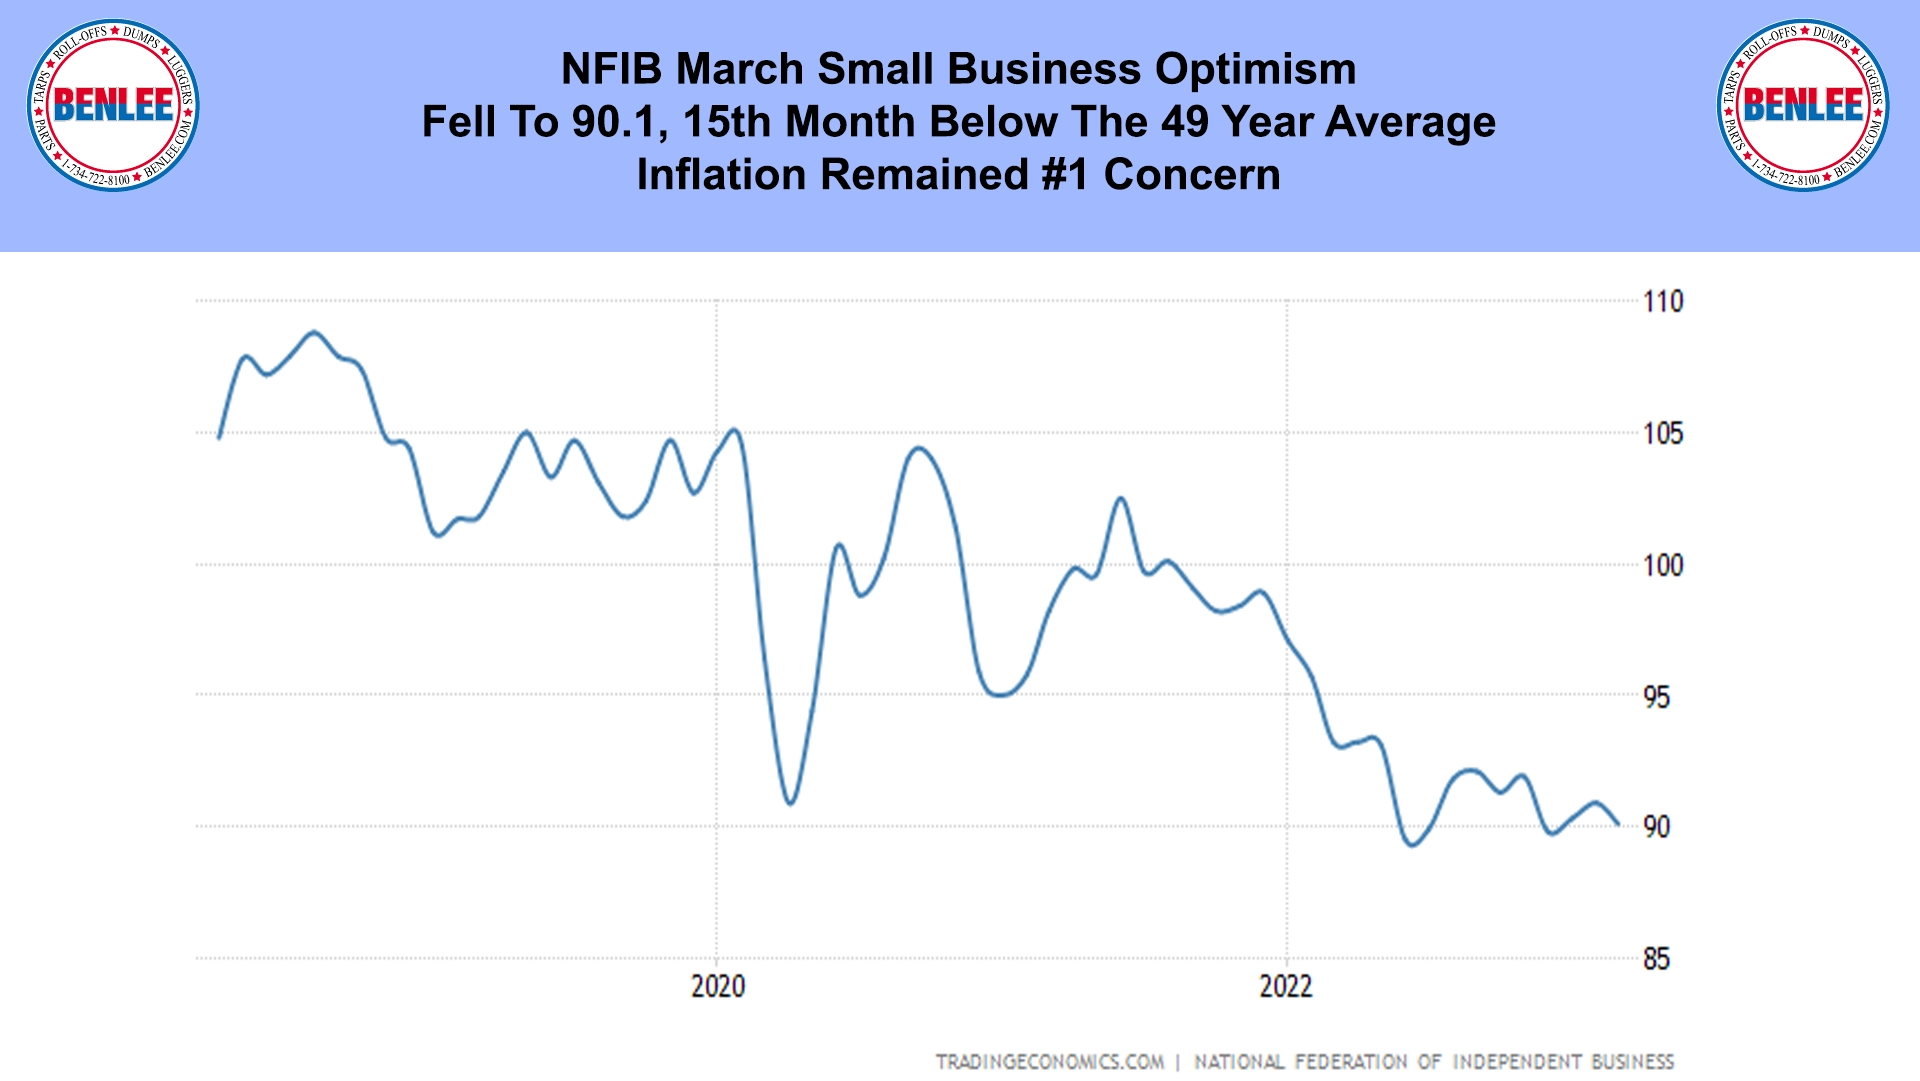 NFIB March Small Business Optimism